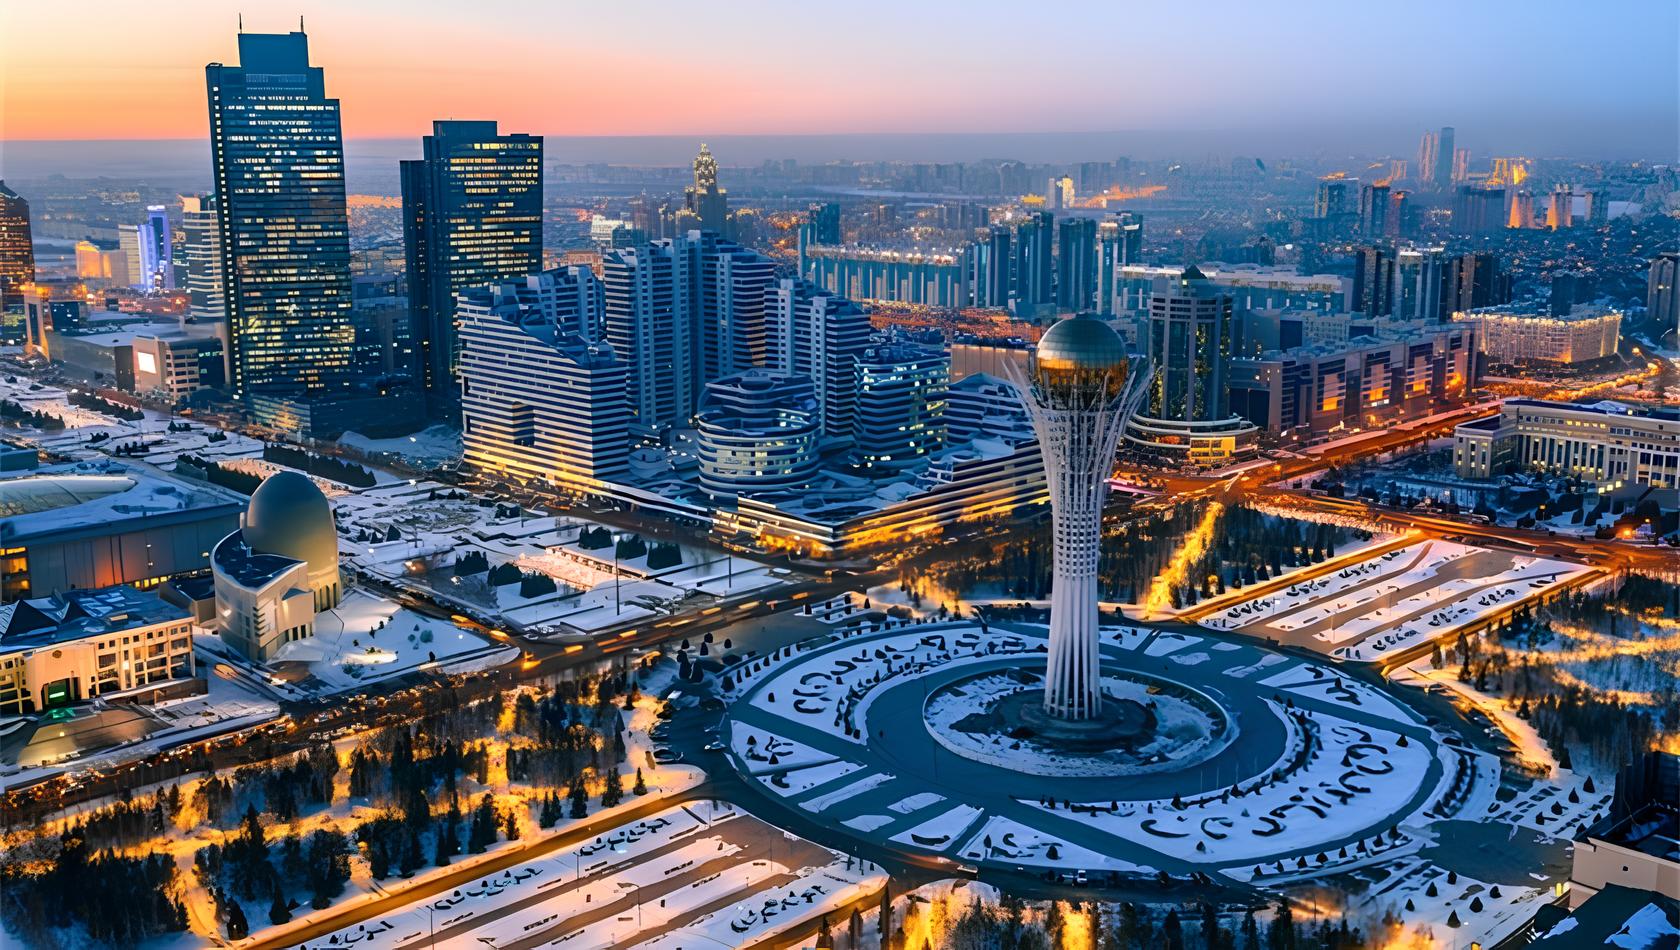 Kazakhstan extends visa-free travel for tourists from 100 countries